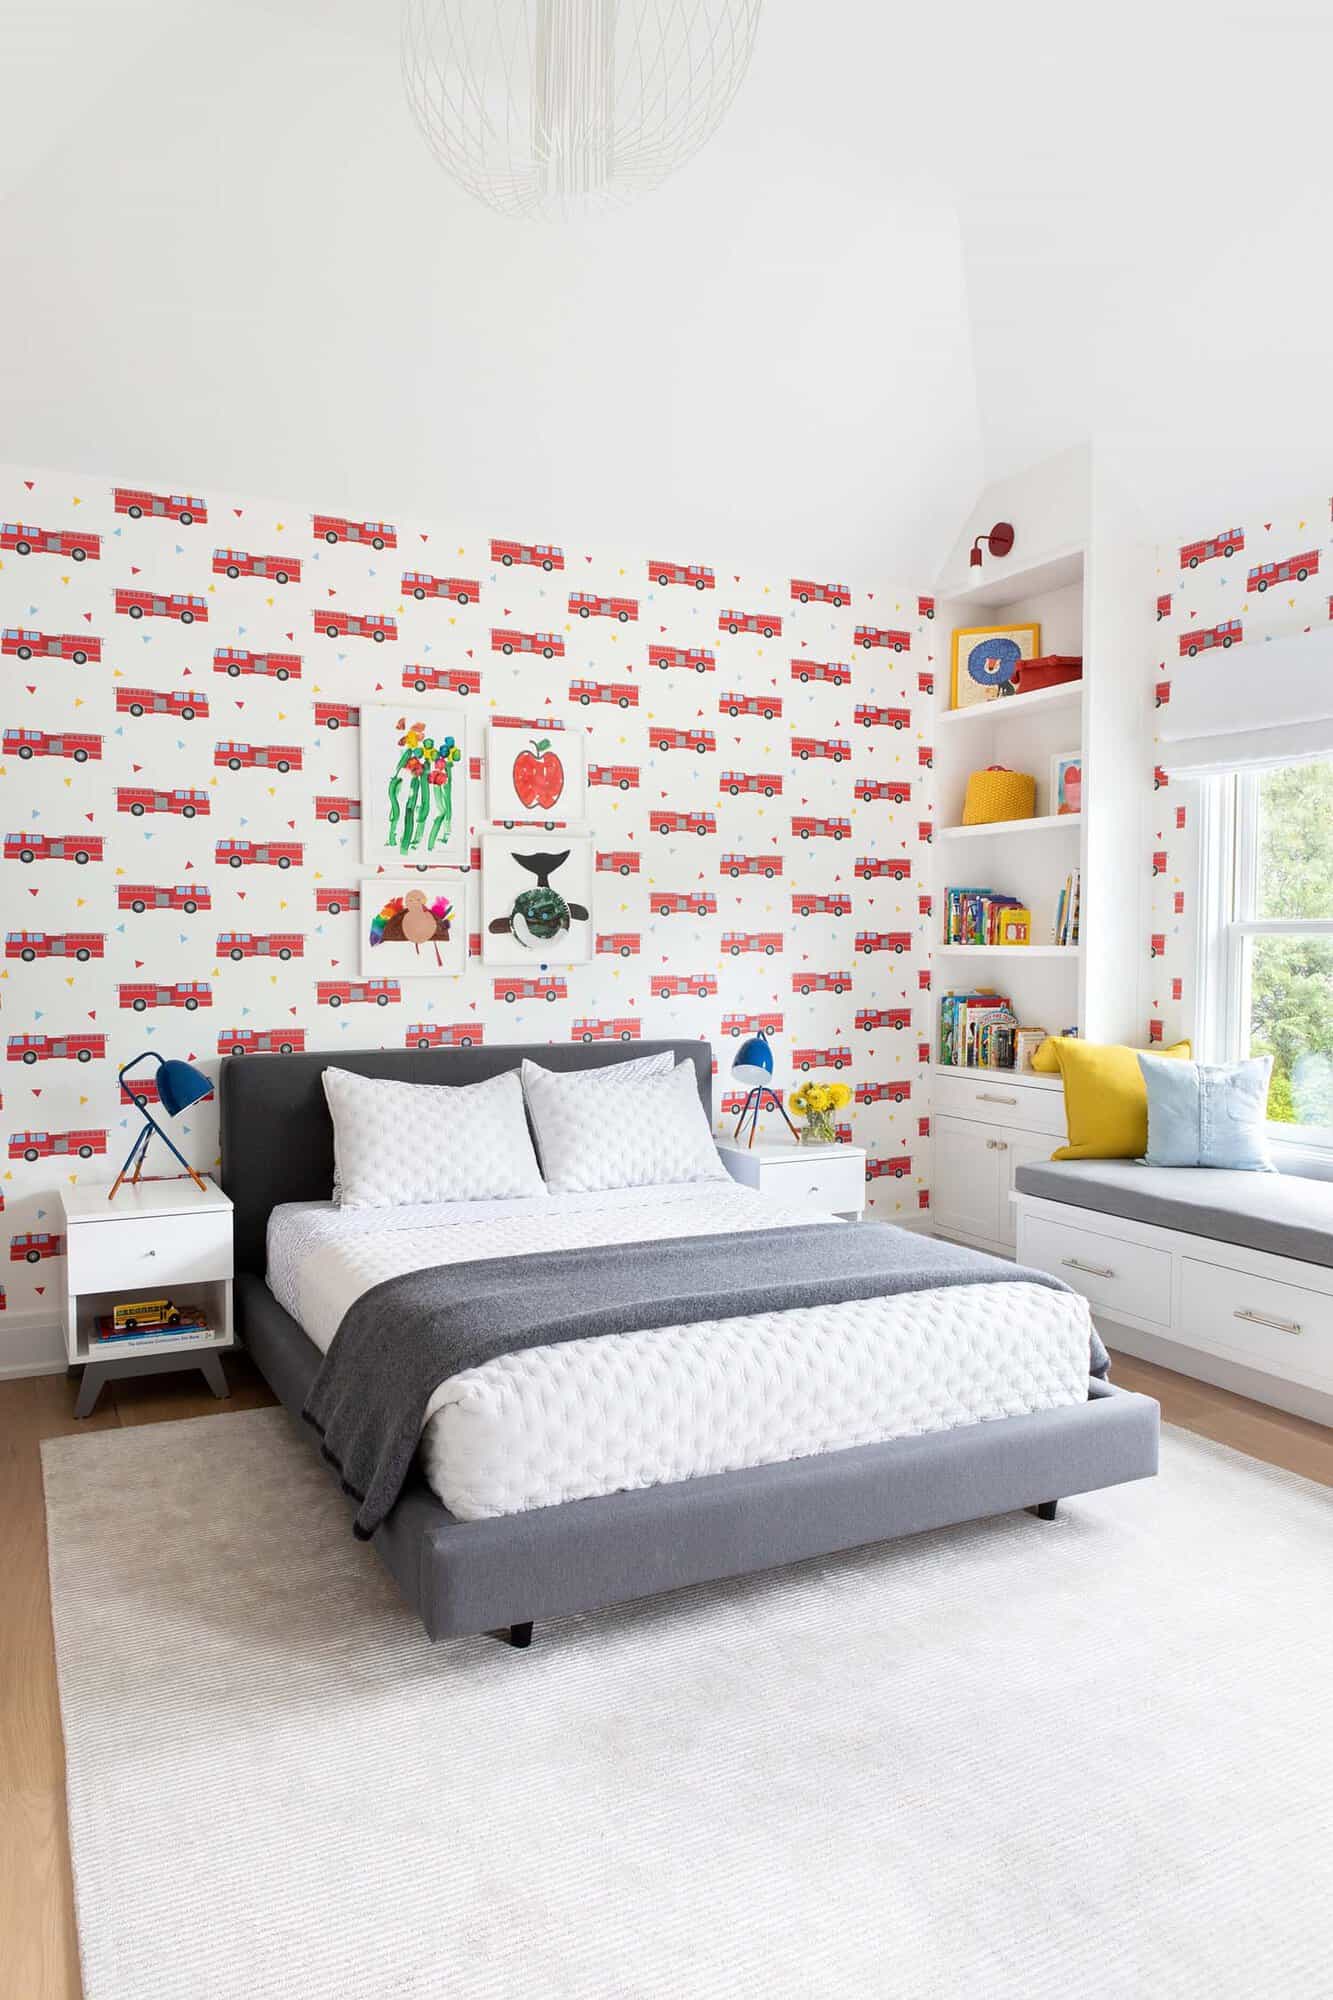 transitional-style boys bedroom with a built-in window seat